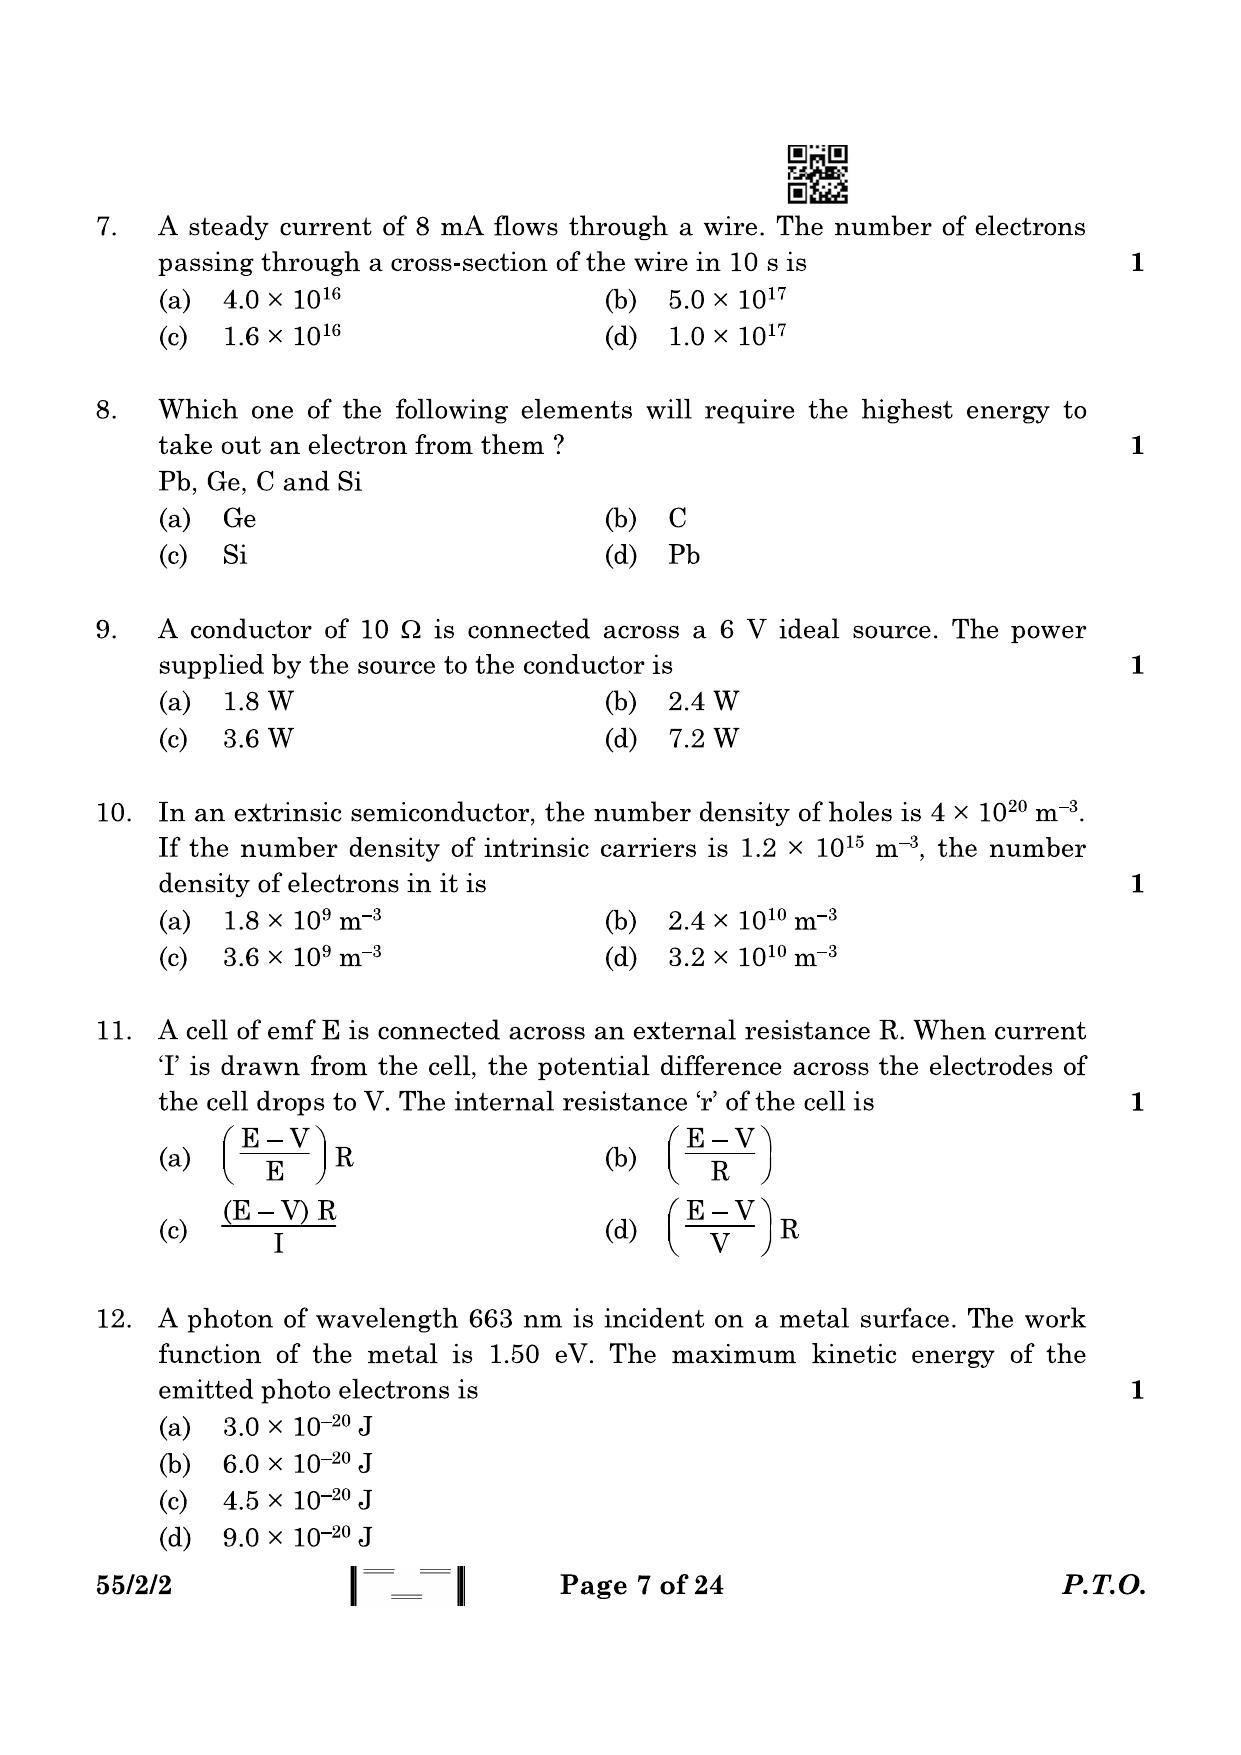 CBSE Class 12 55-2-2 Physics 2023 Question Paper - Page 7